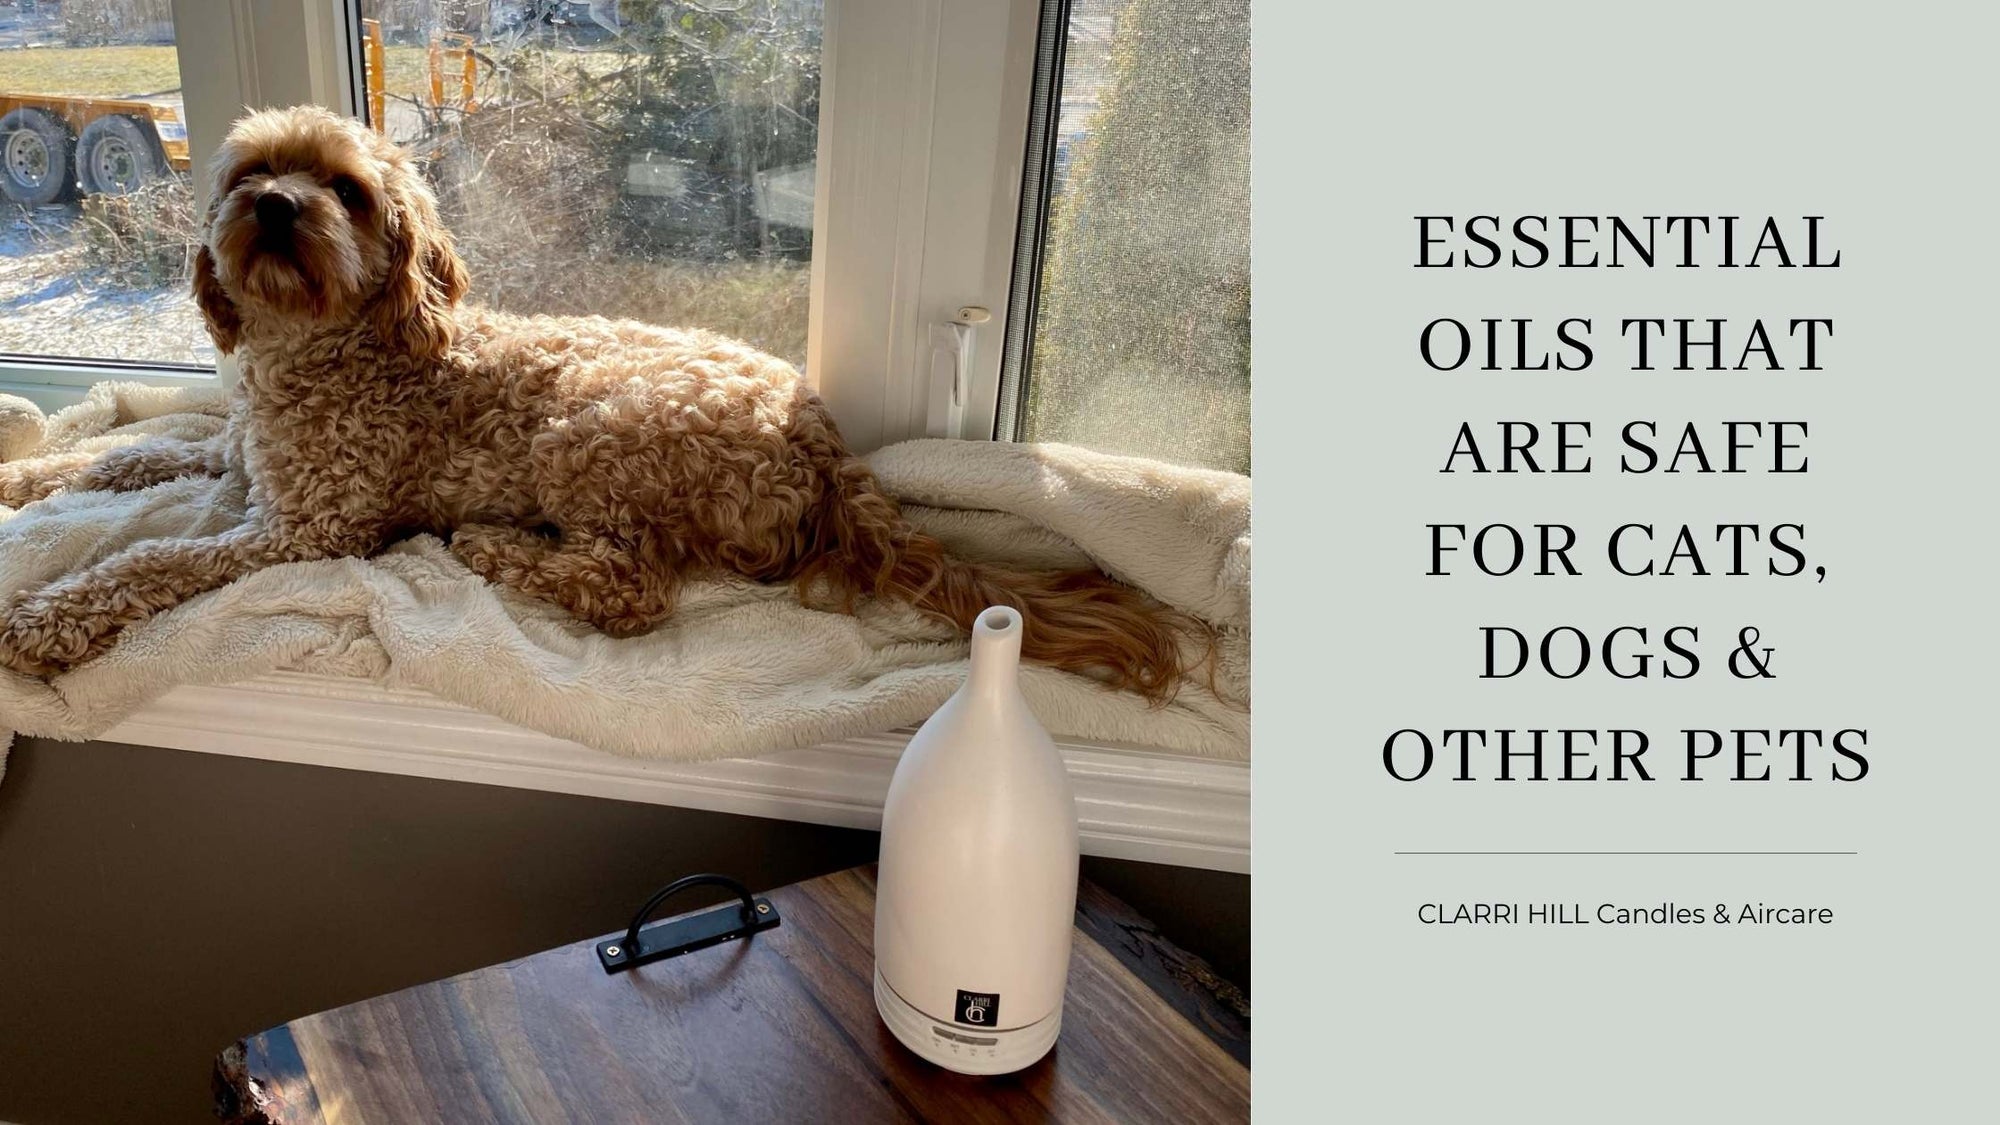 Essential Oils that are Safe for Cats, Dogs & Other Pets | CLARRI HILL